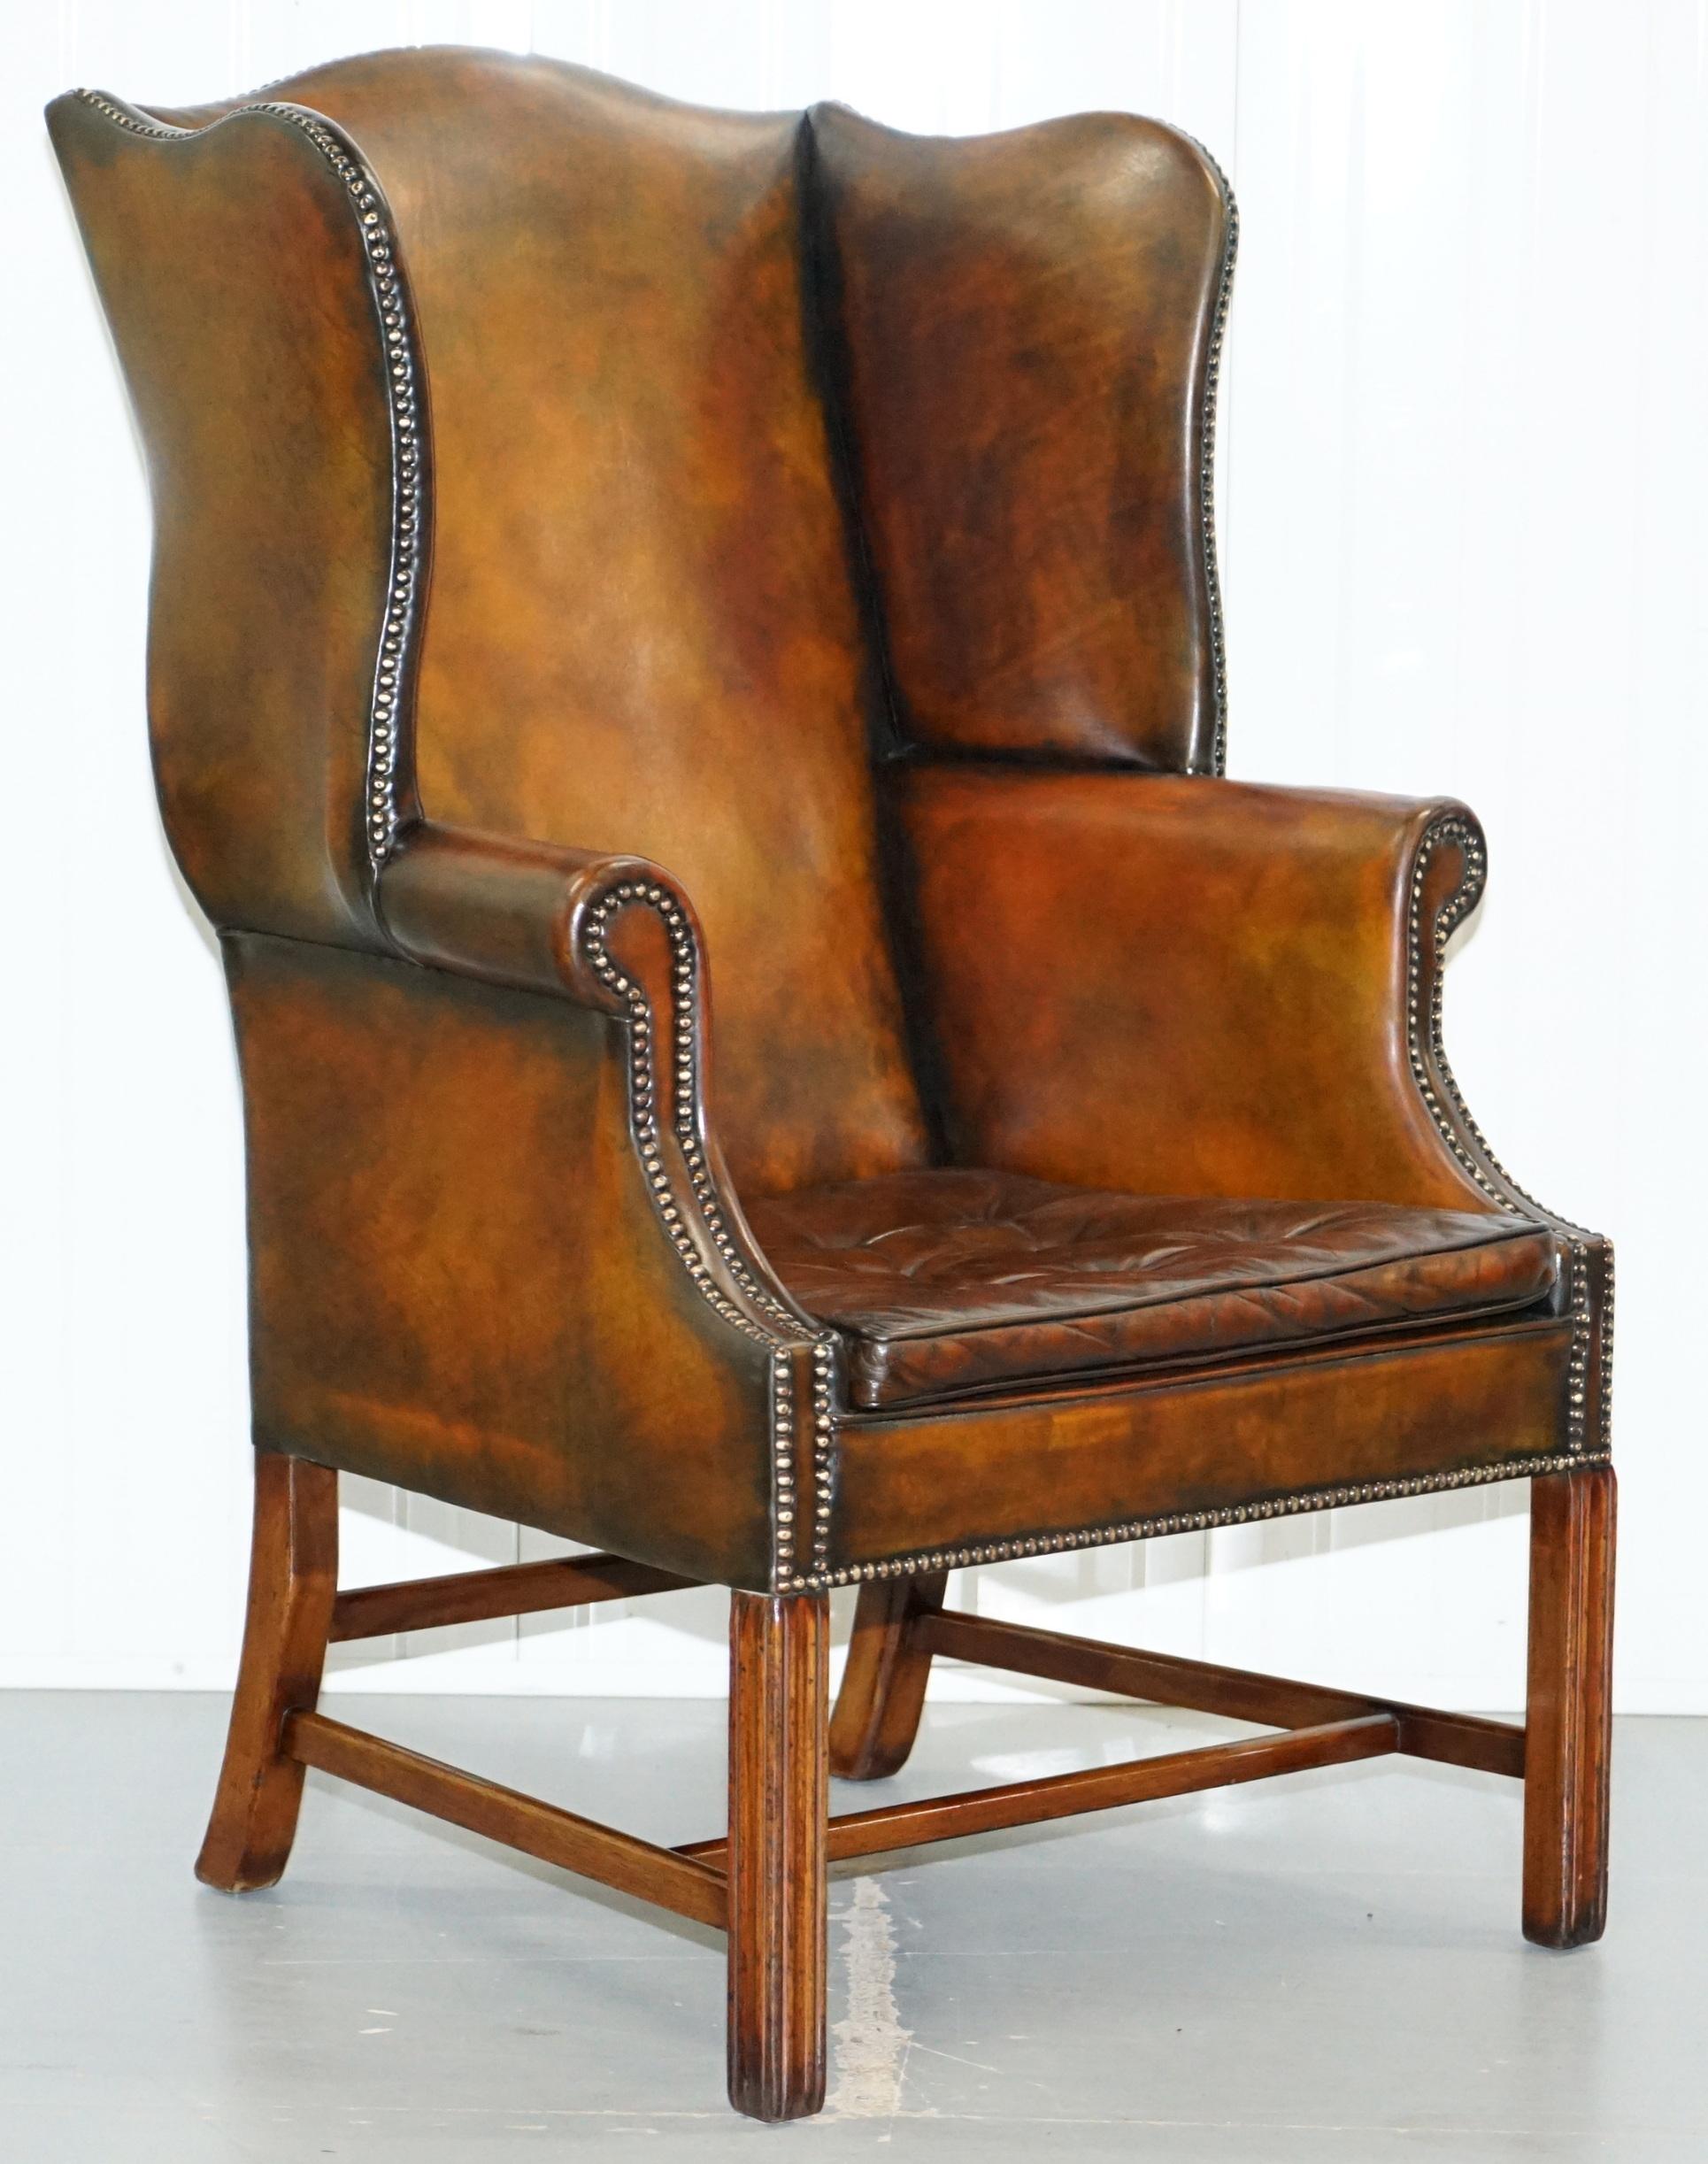 We are delighted to offer for sale this stunning pair of original Georgian, circa 1820 fully restored wingback armchairs

A simply glorious pair, the frames are long, thin and elegant, the stud work to the front arms narrow and expertly tacked.